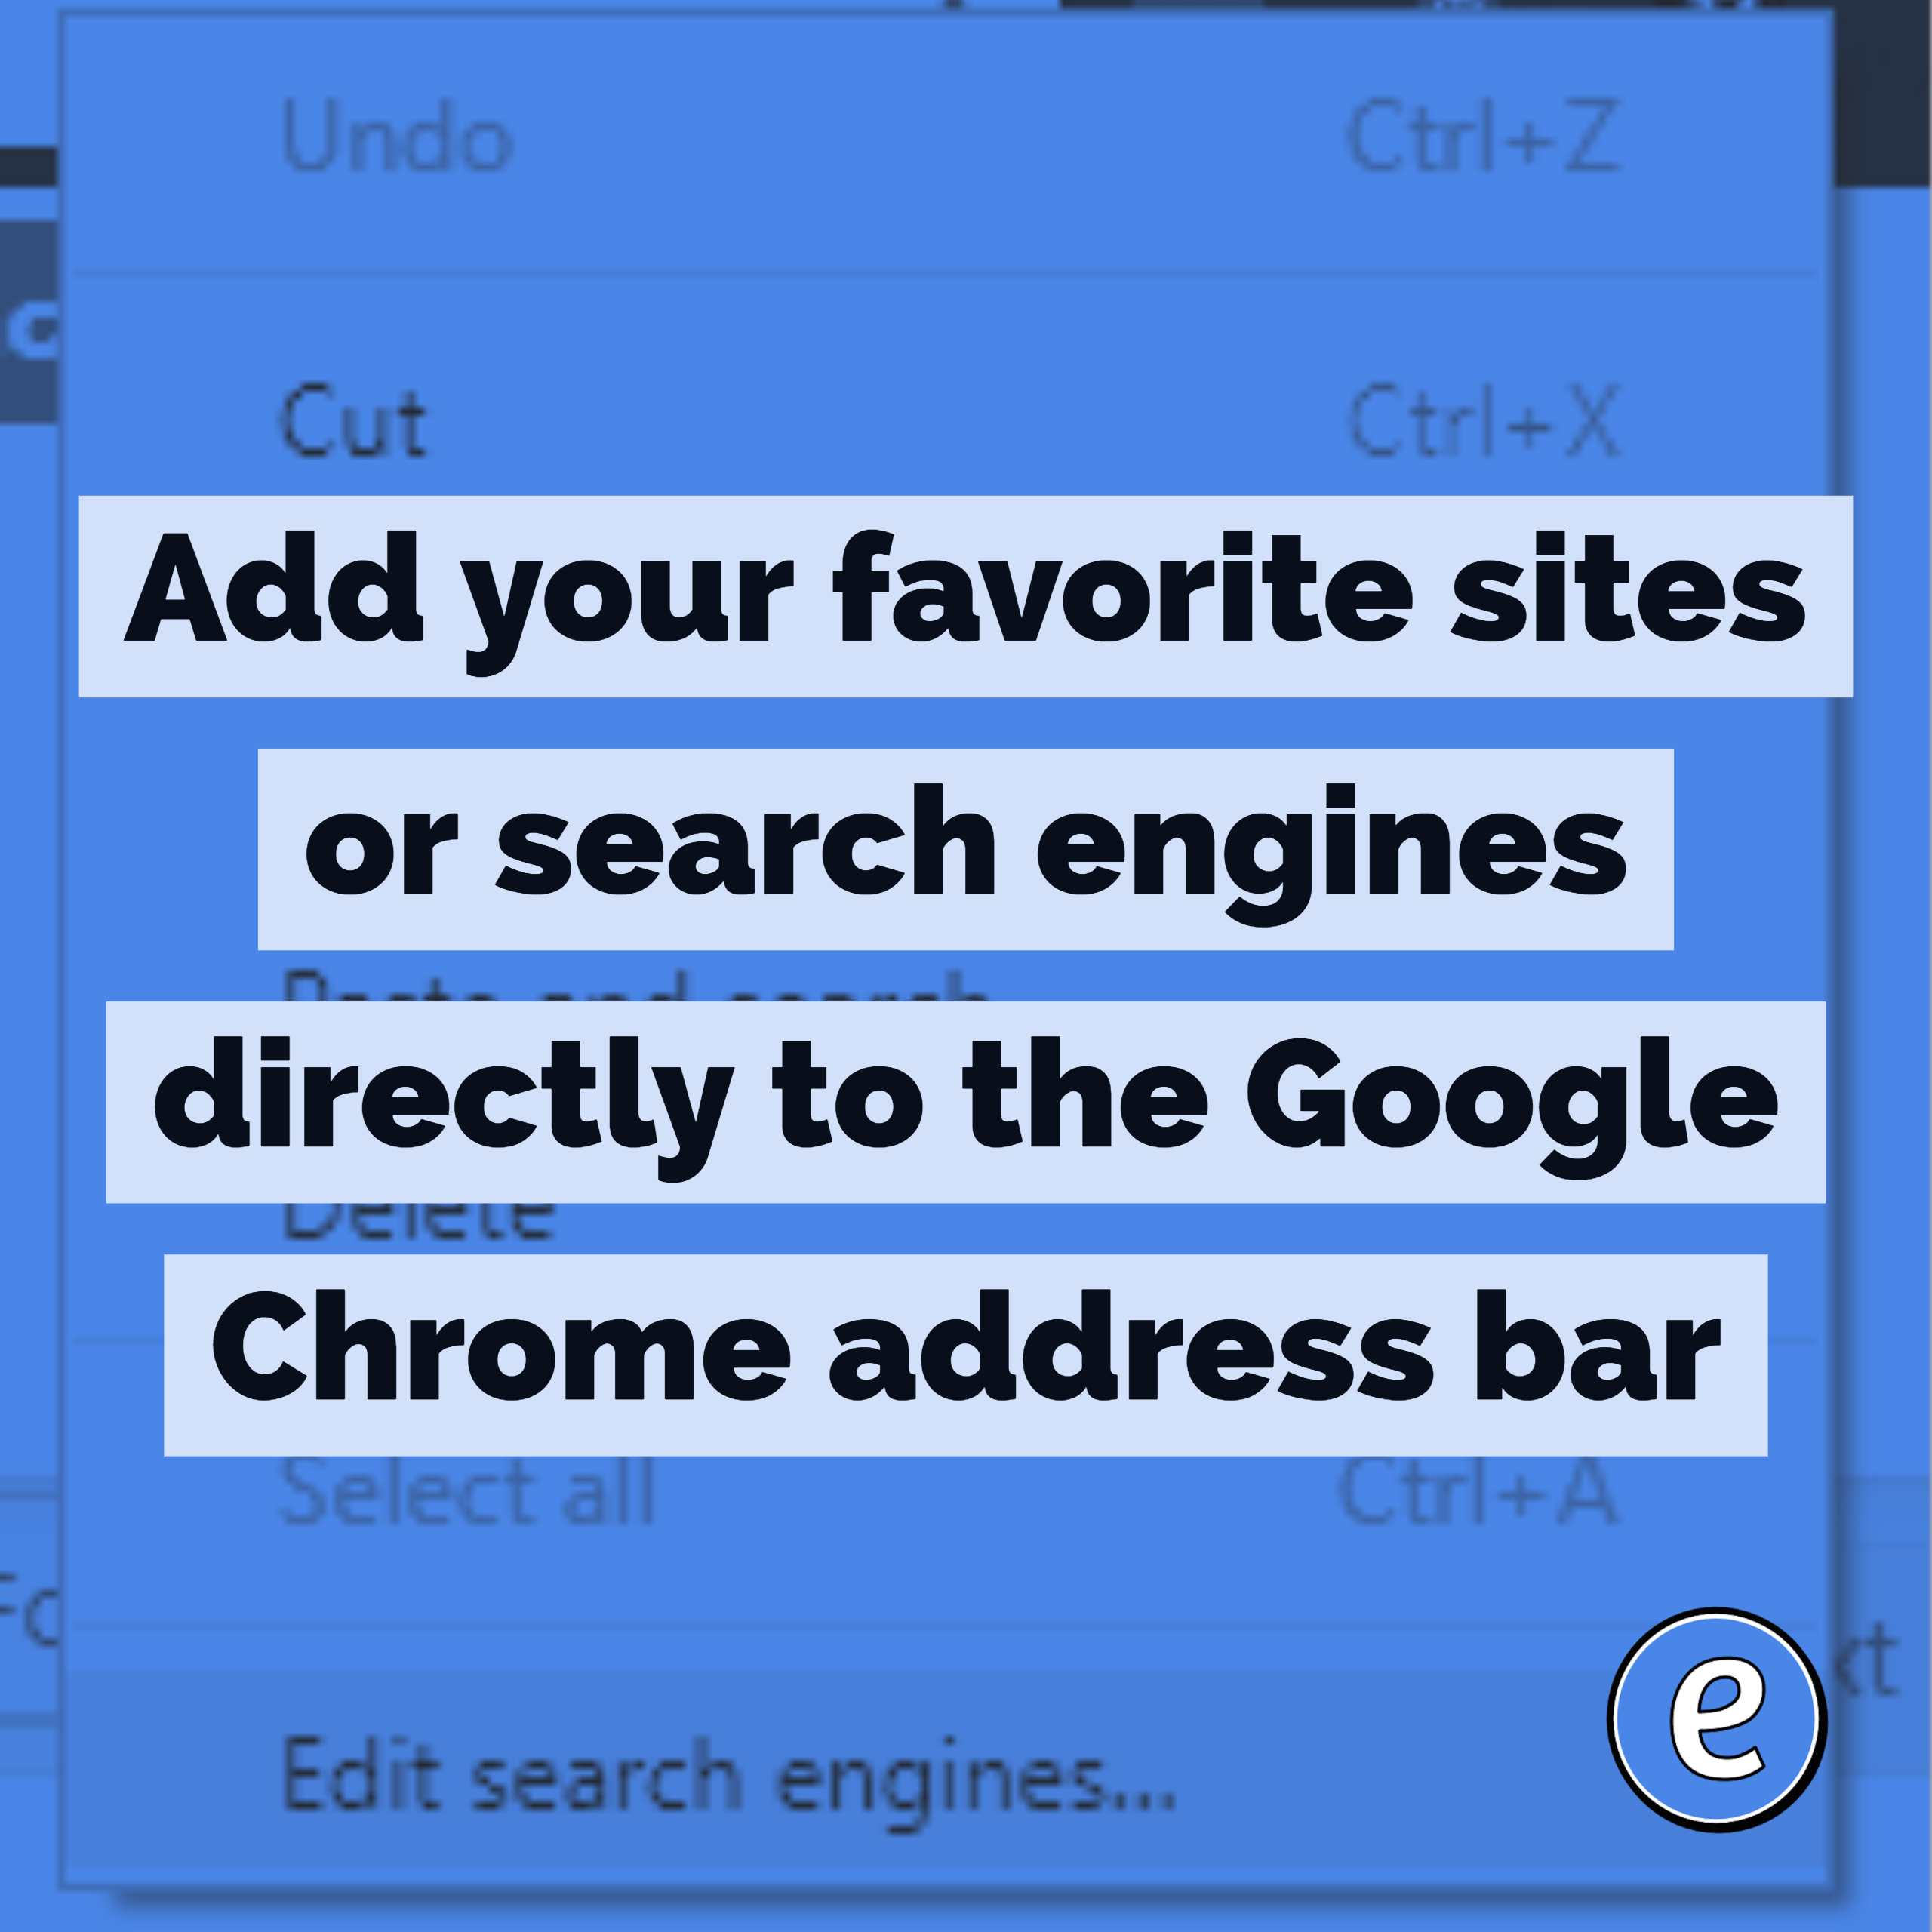 Add your favorite sites or search engines directly to the Google Chrome address bar